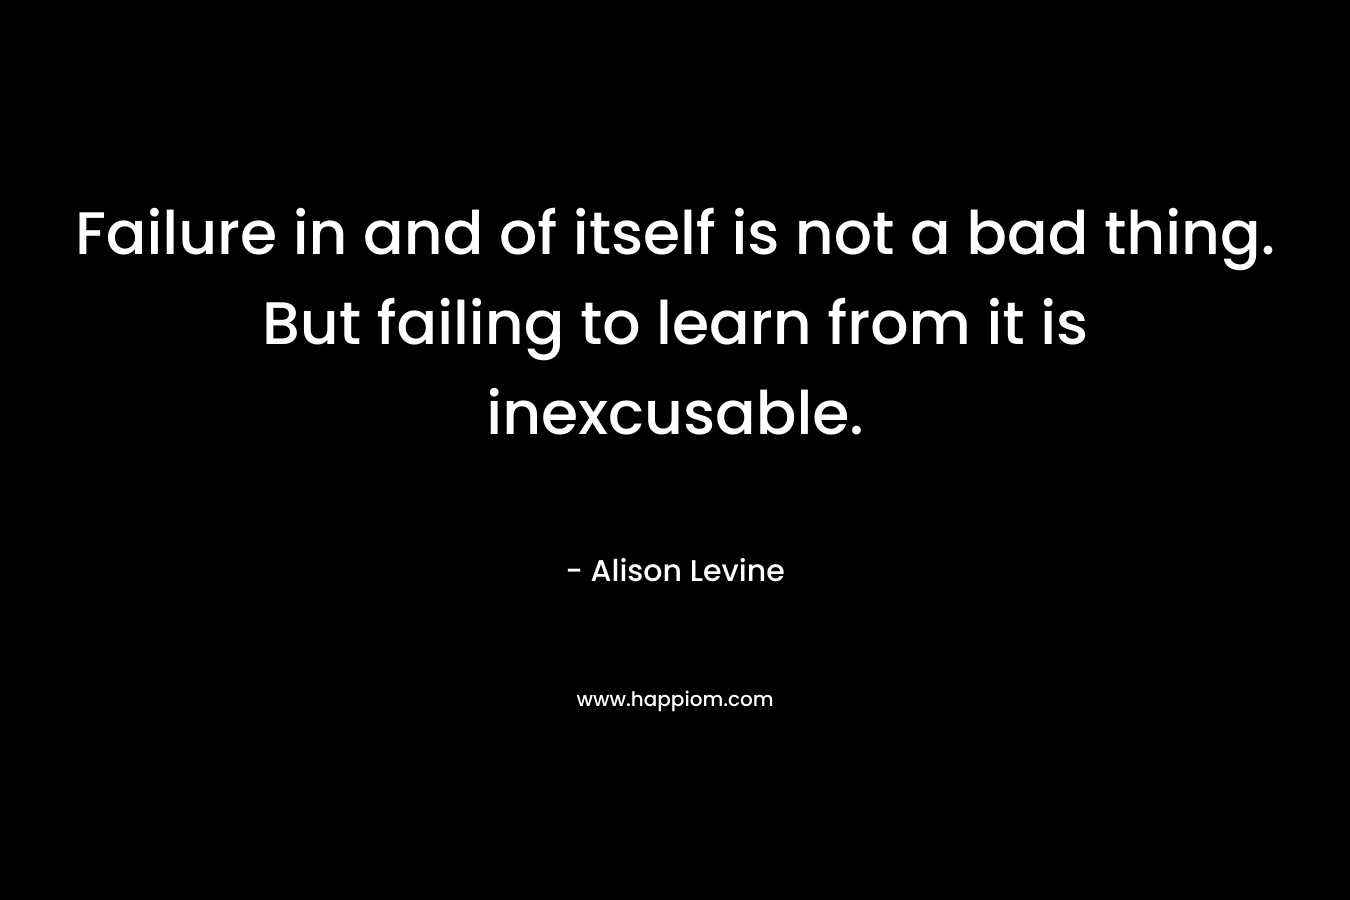 Failure in and of itself is not a bad thing. But failing to learn from it is inexcusable.